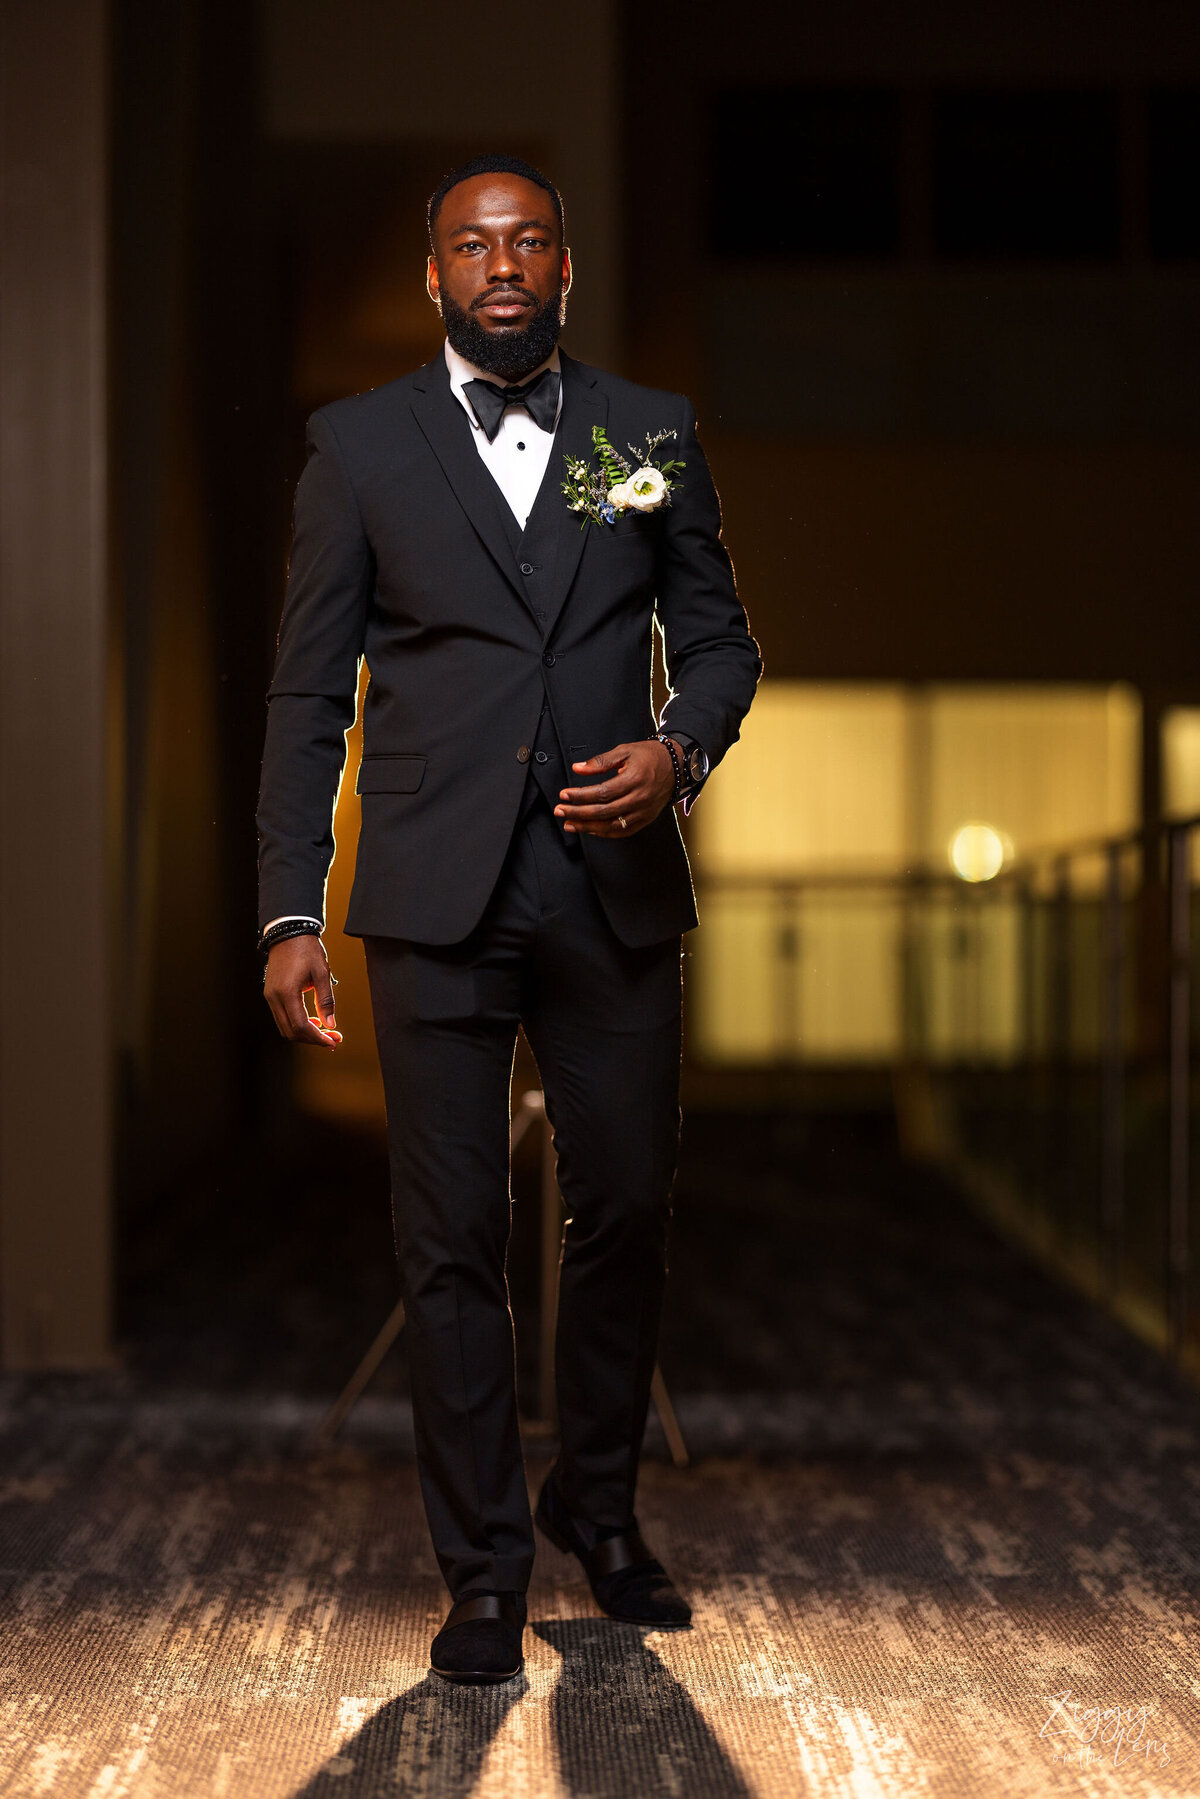 Tomi and Tolu Oruka Events Ziggy on the Lens photographer Wedding event planners Toronto planner African Nigerian Eyitayo Dada Dara Ayoola ottawa convention and event centre pocket flowers Navy blue groom suit ball gown black bride classy  79